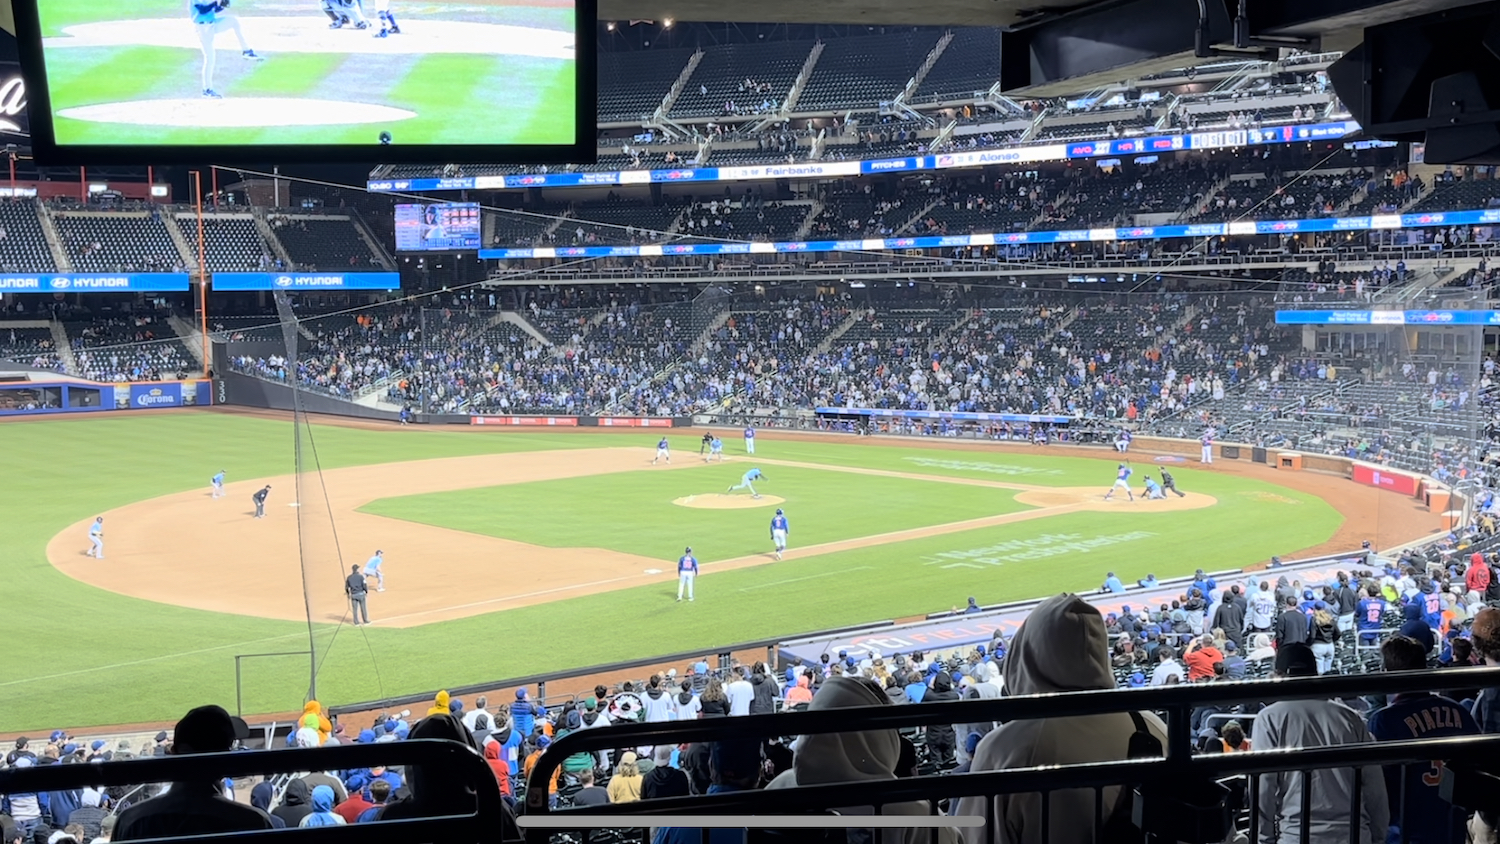 A view of the Mets game from the concourse. Pete Alonso is about to hit a walk-off home run.